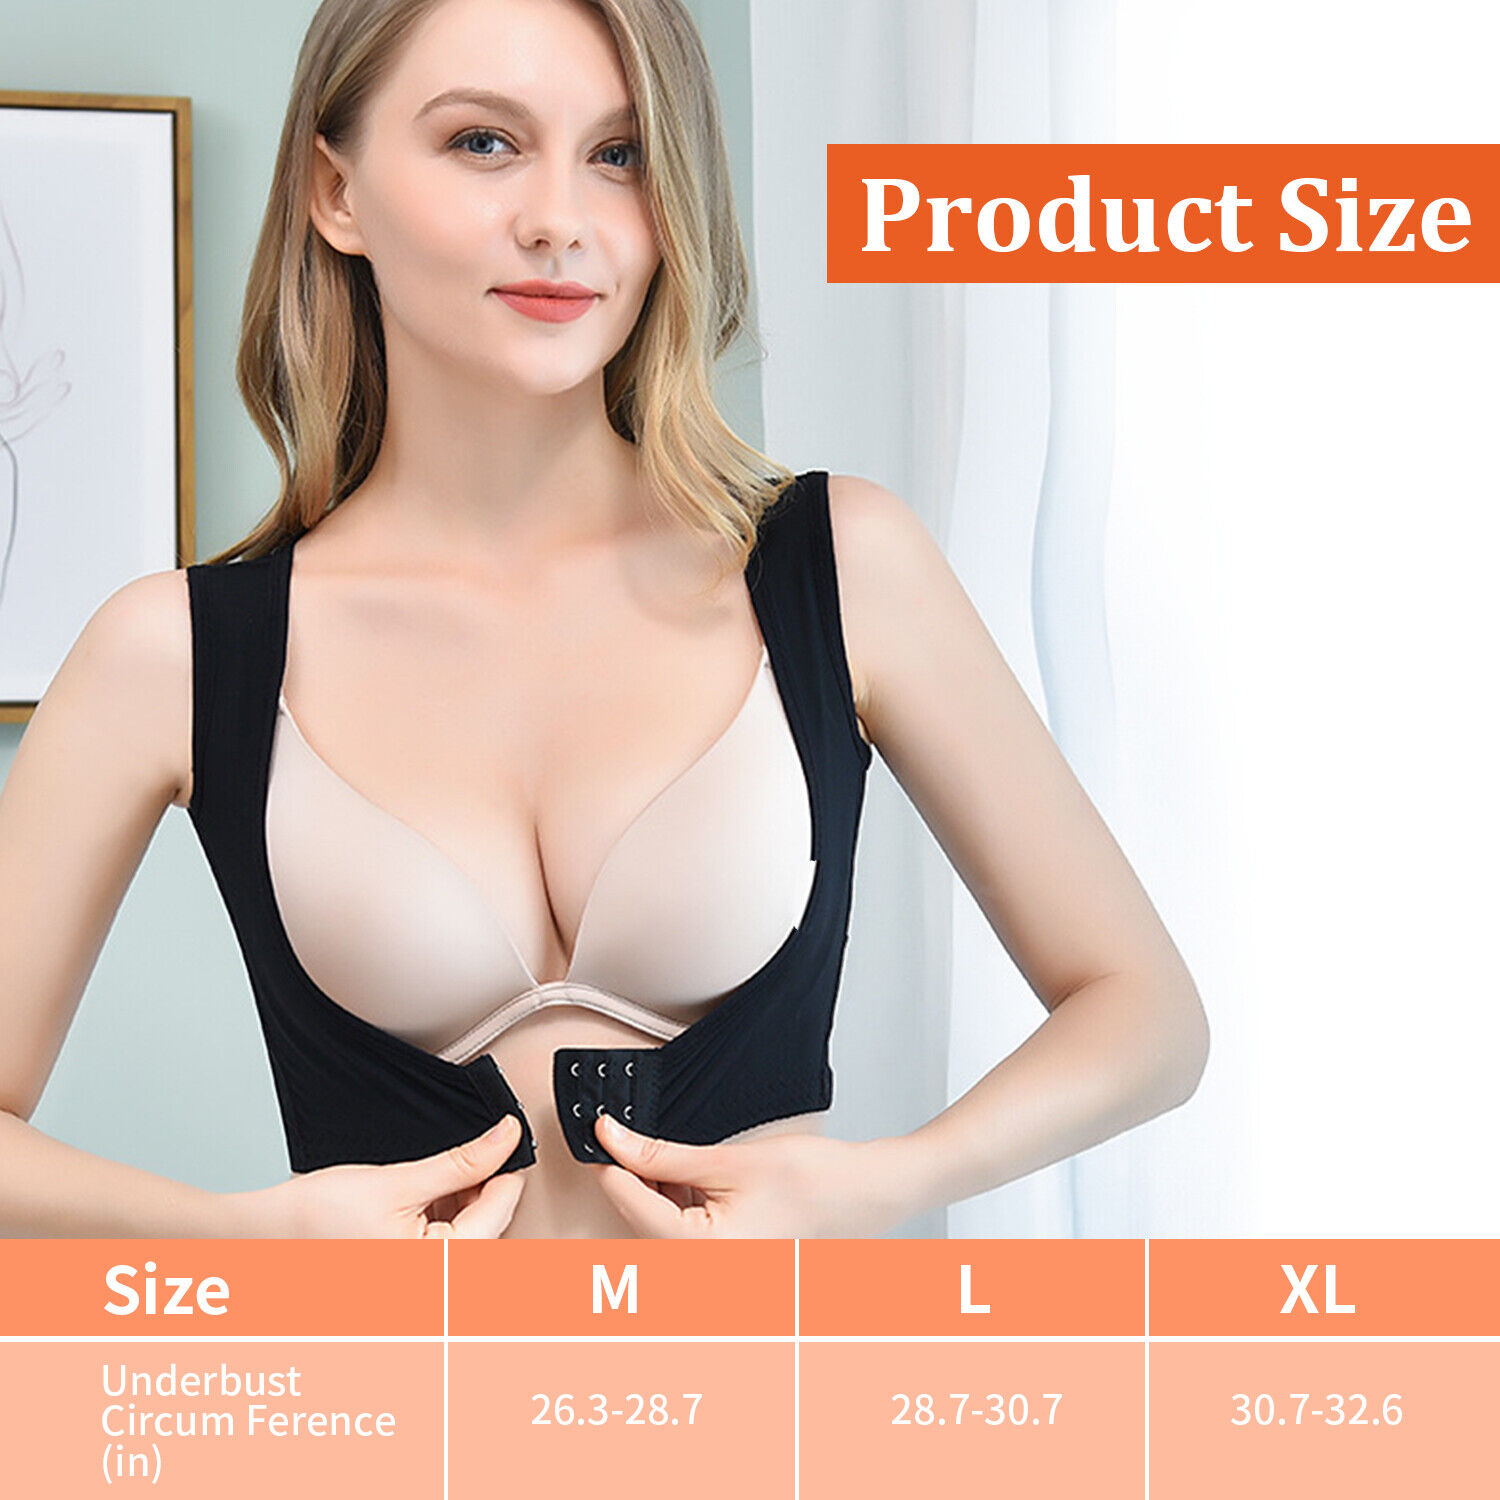 Posture Corrector PUSH up Bra for Chest Binder and Back Pain Support